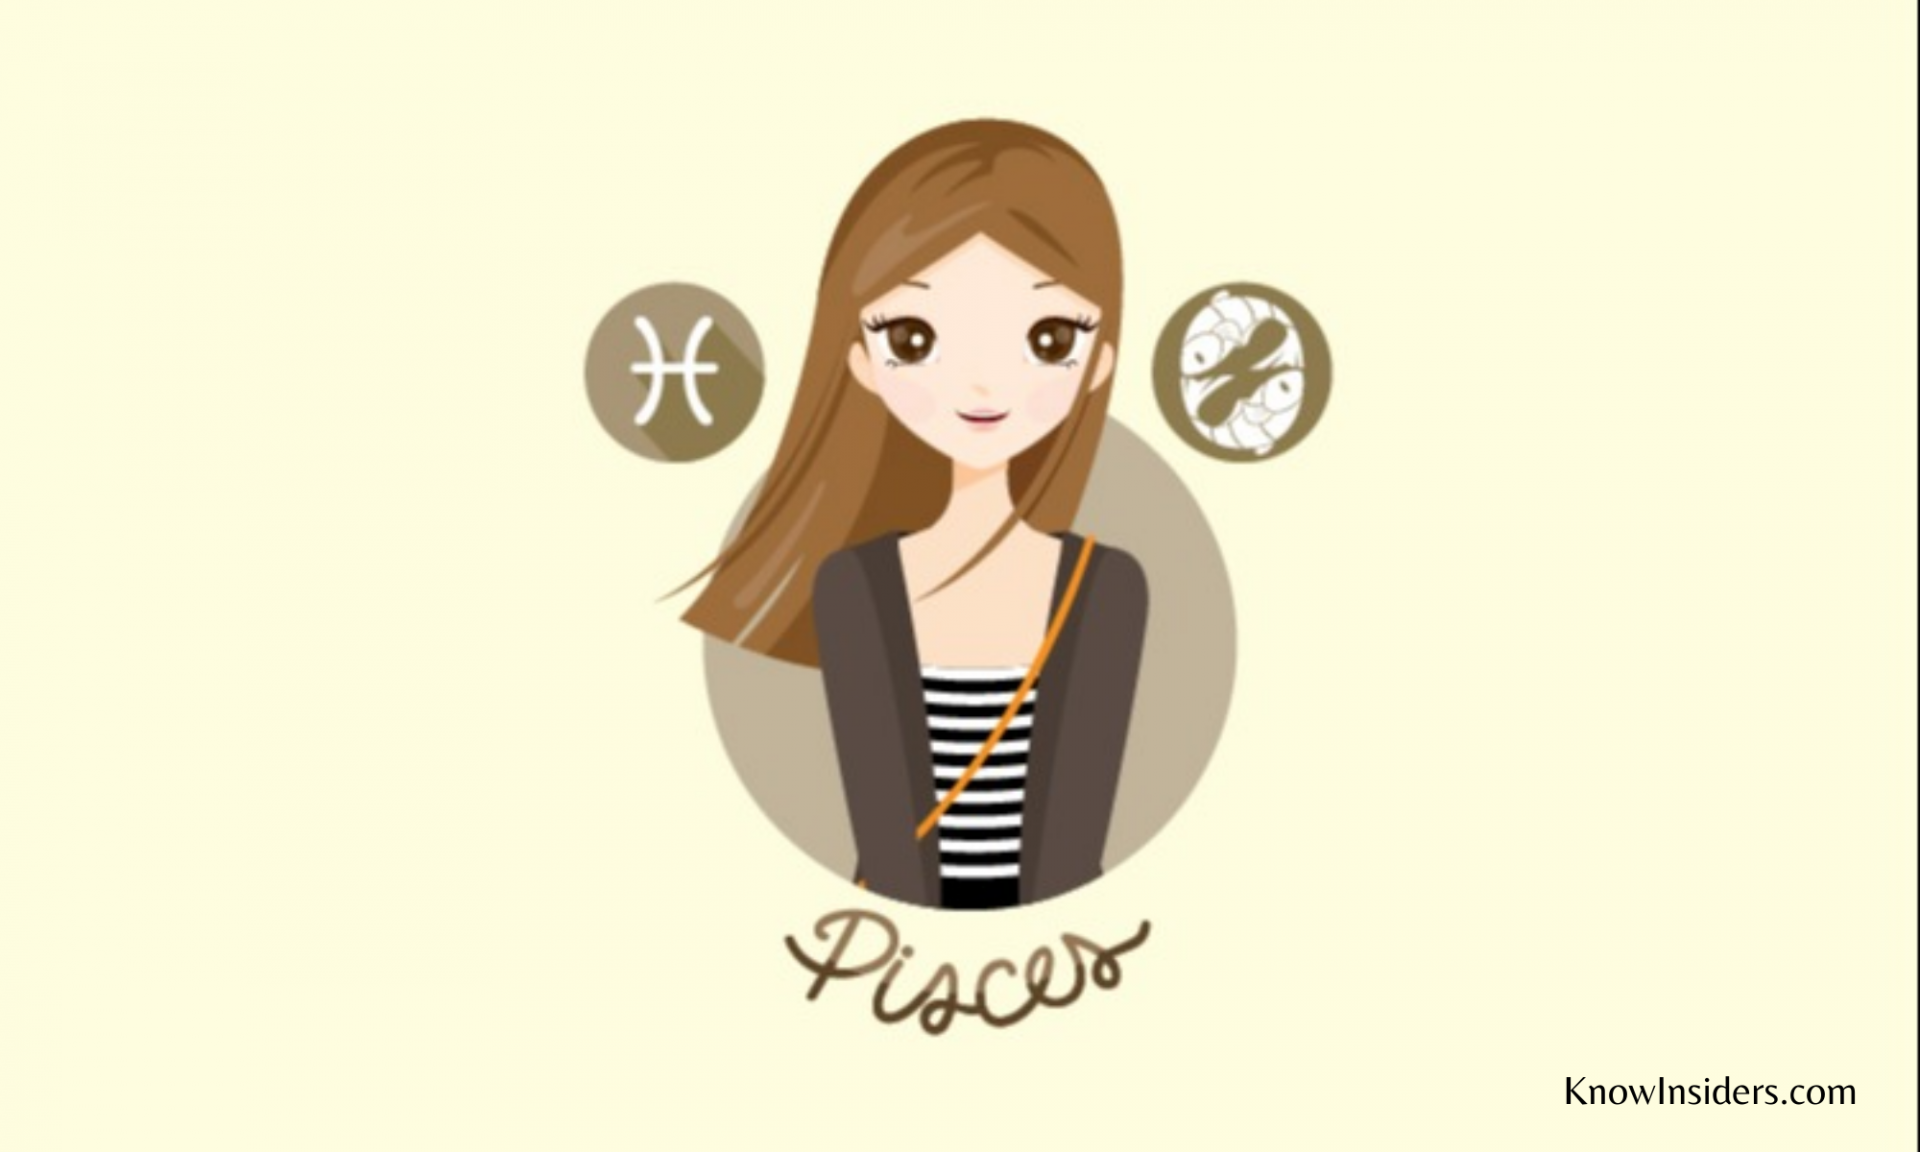 PISCES Horoscope: Astrological Prediction for Beauty & Health